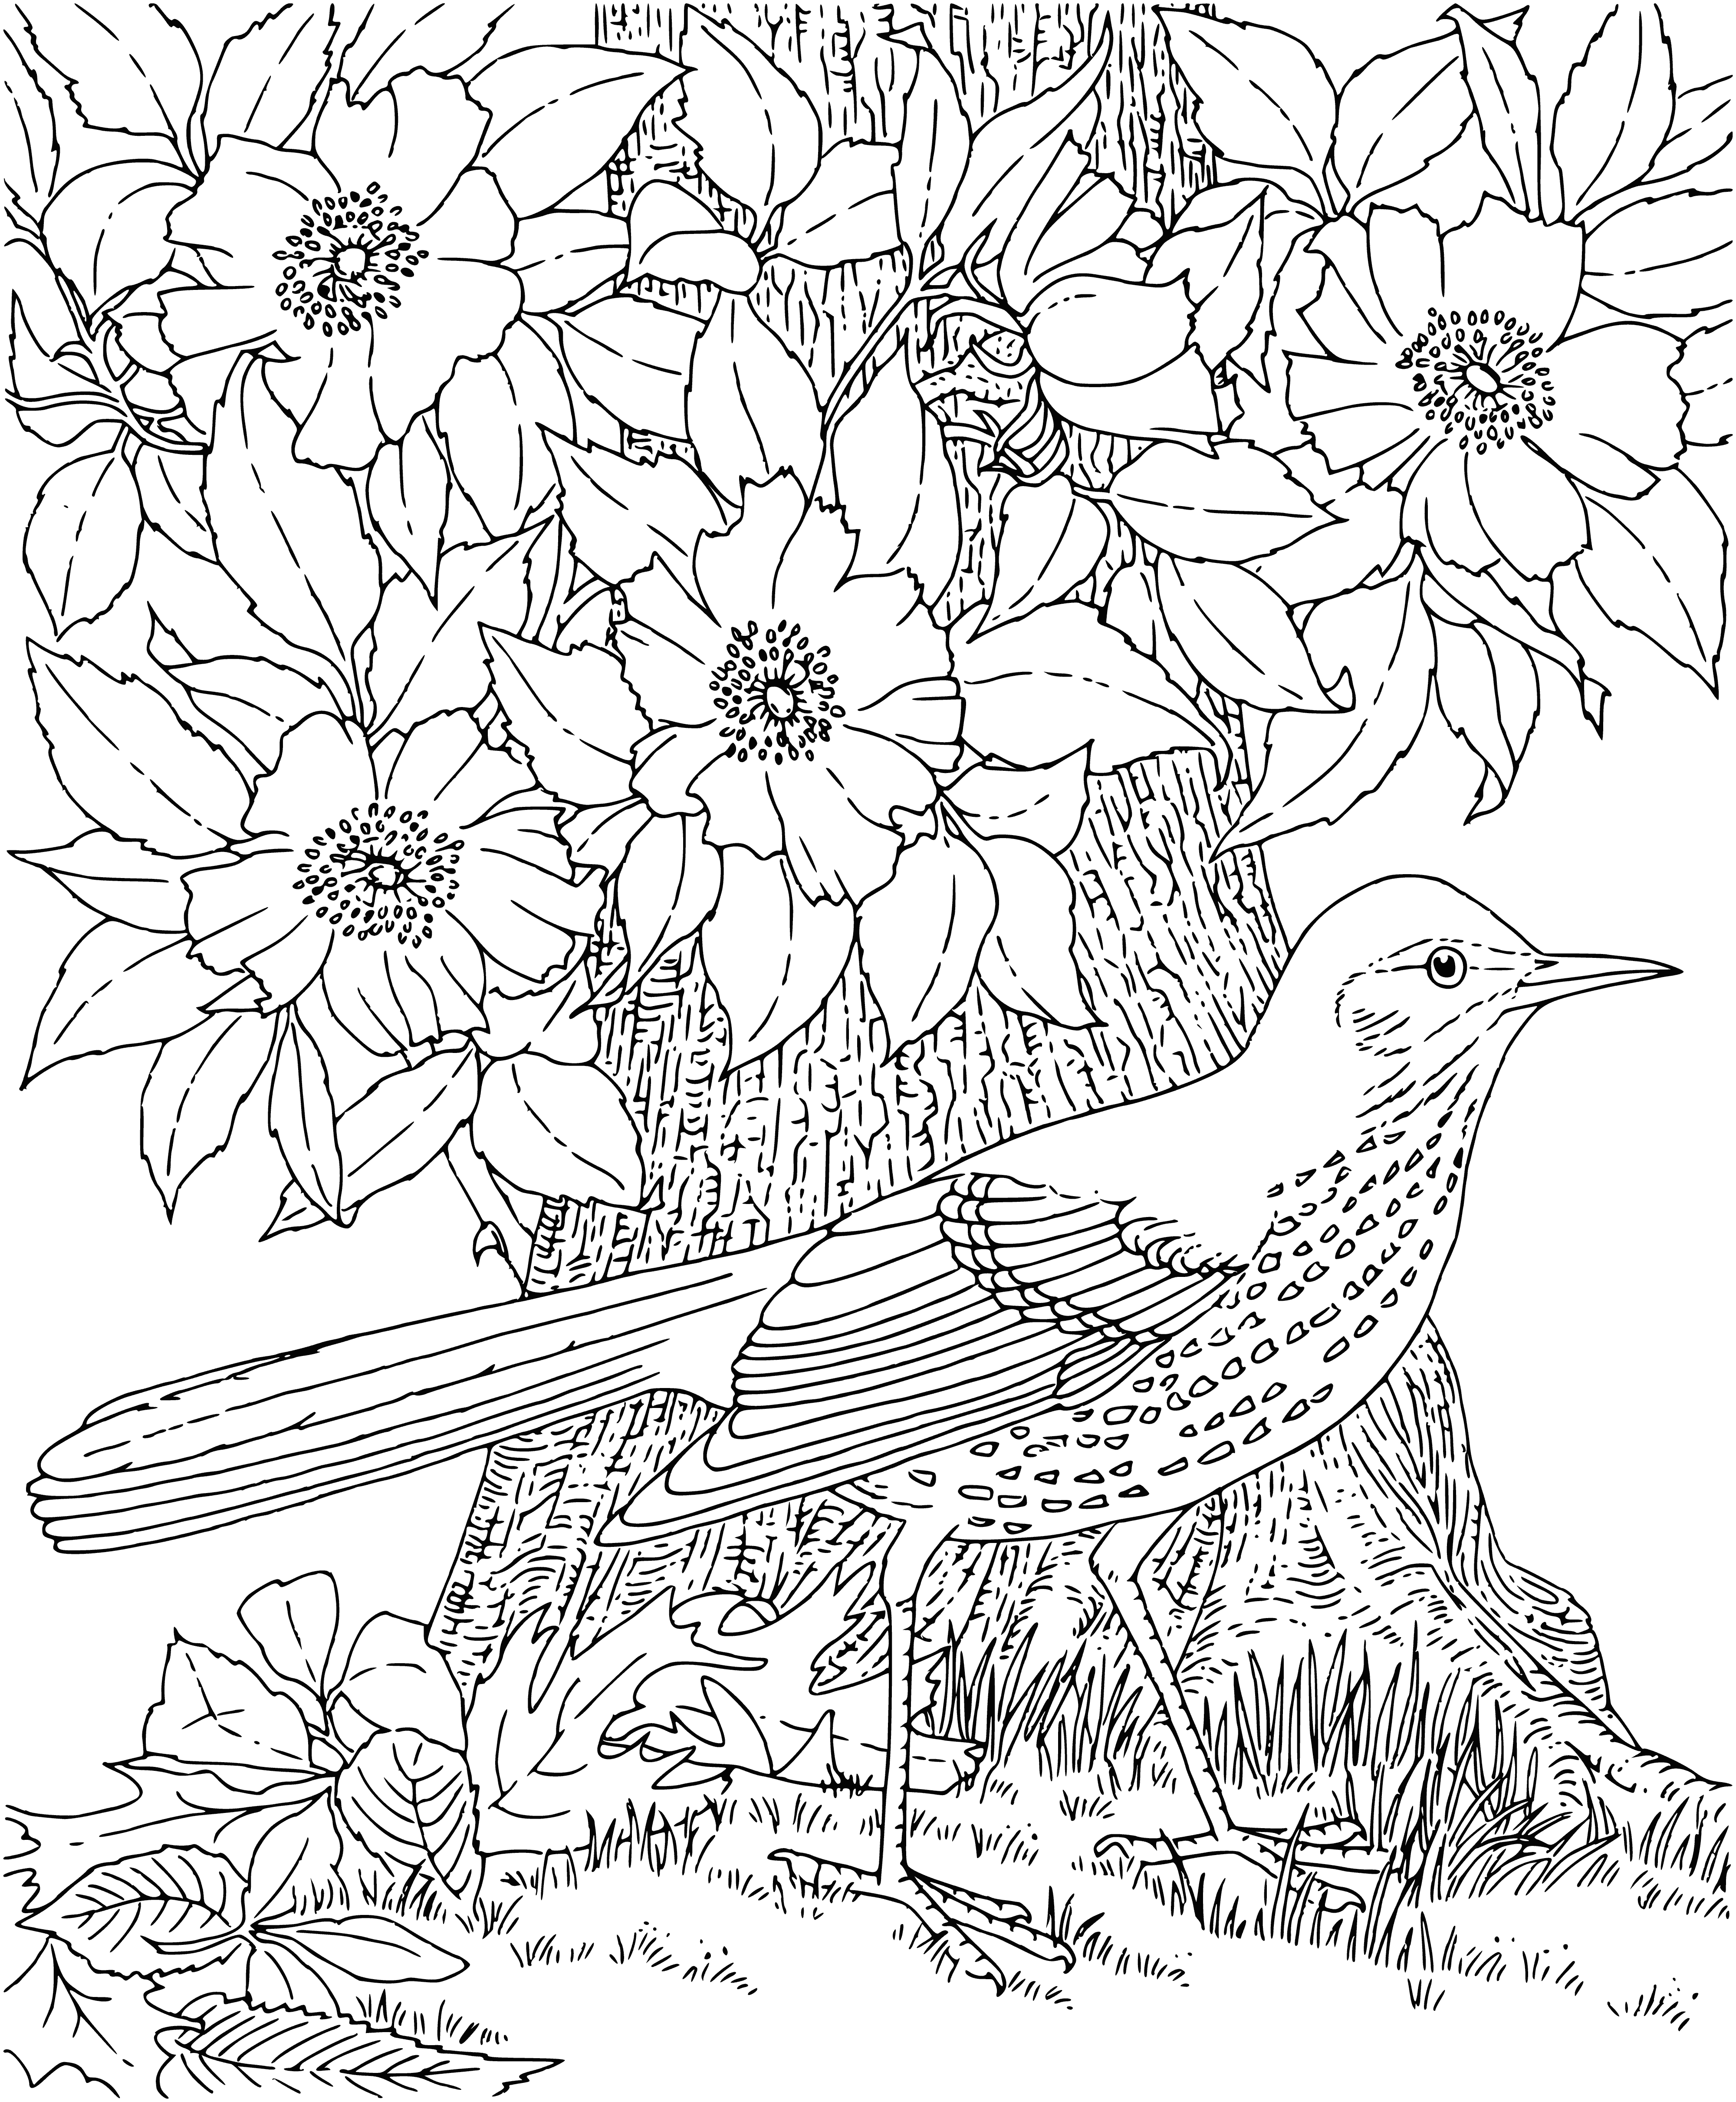 Brown woodpecker coloring page